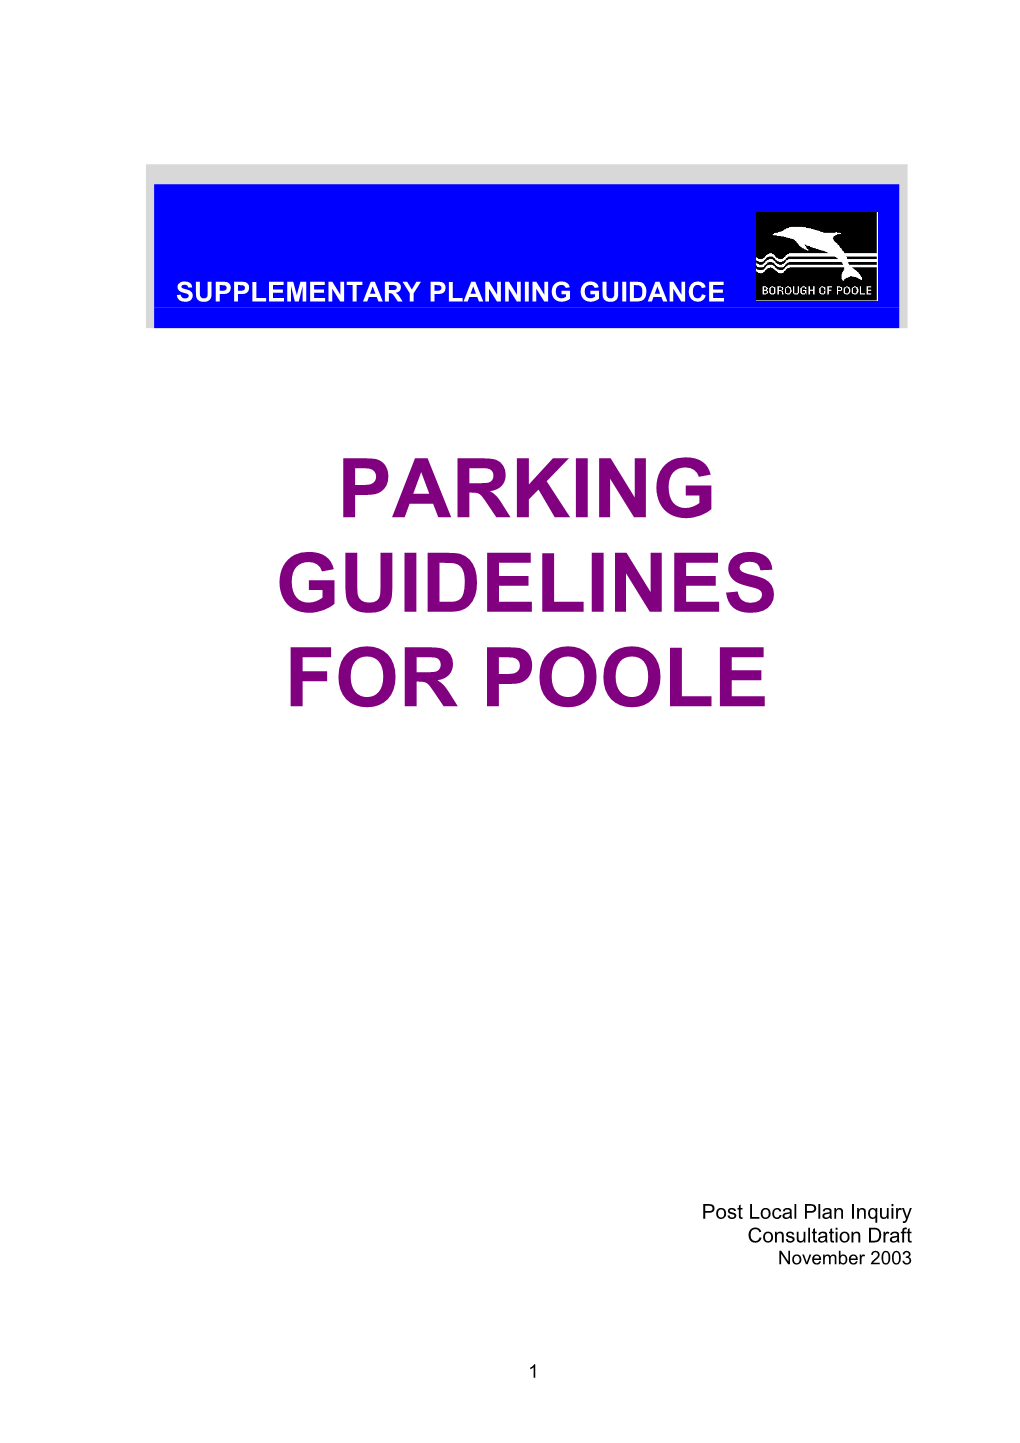 Appendix to Proposed Changes to Draft Supplementary Planning Guidance on Parking